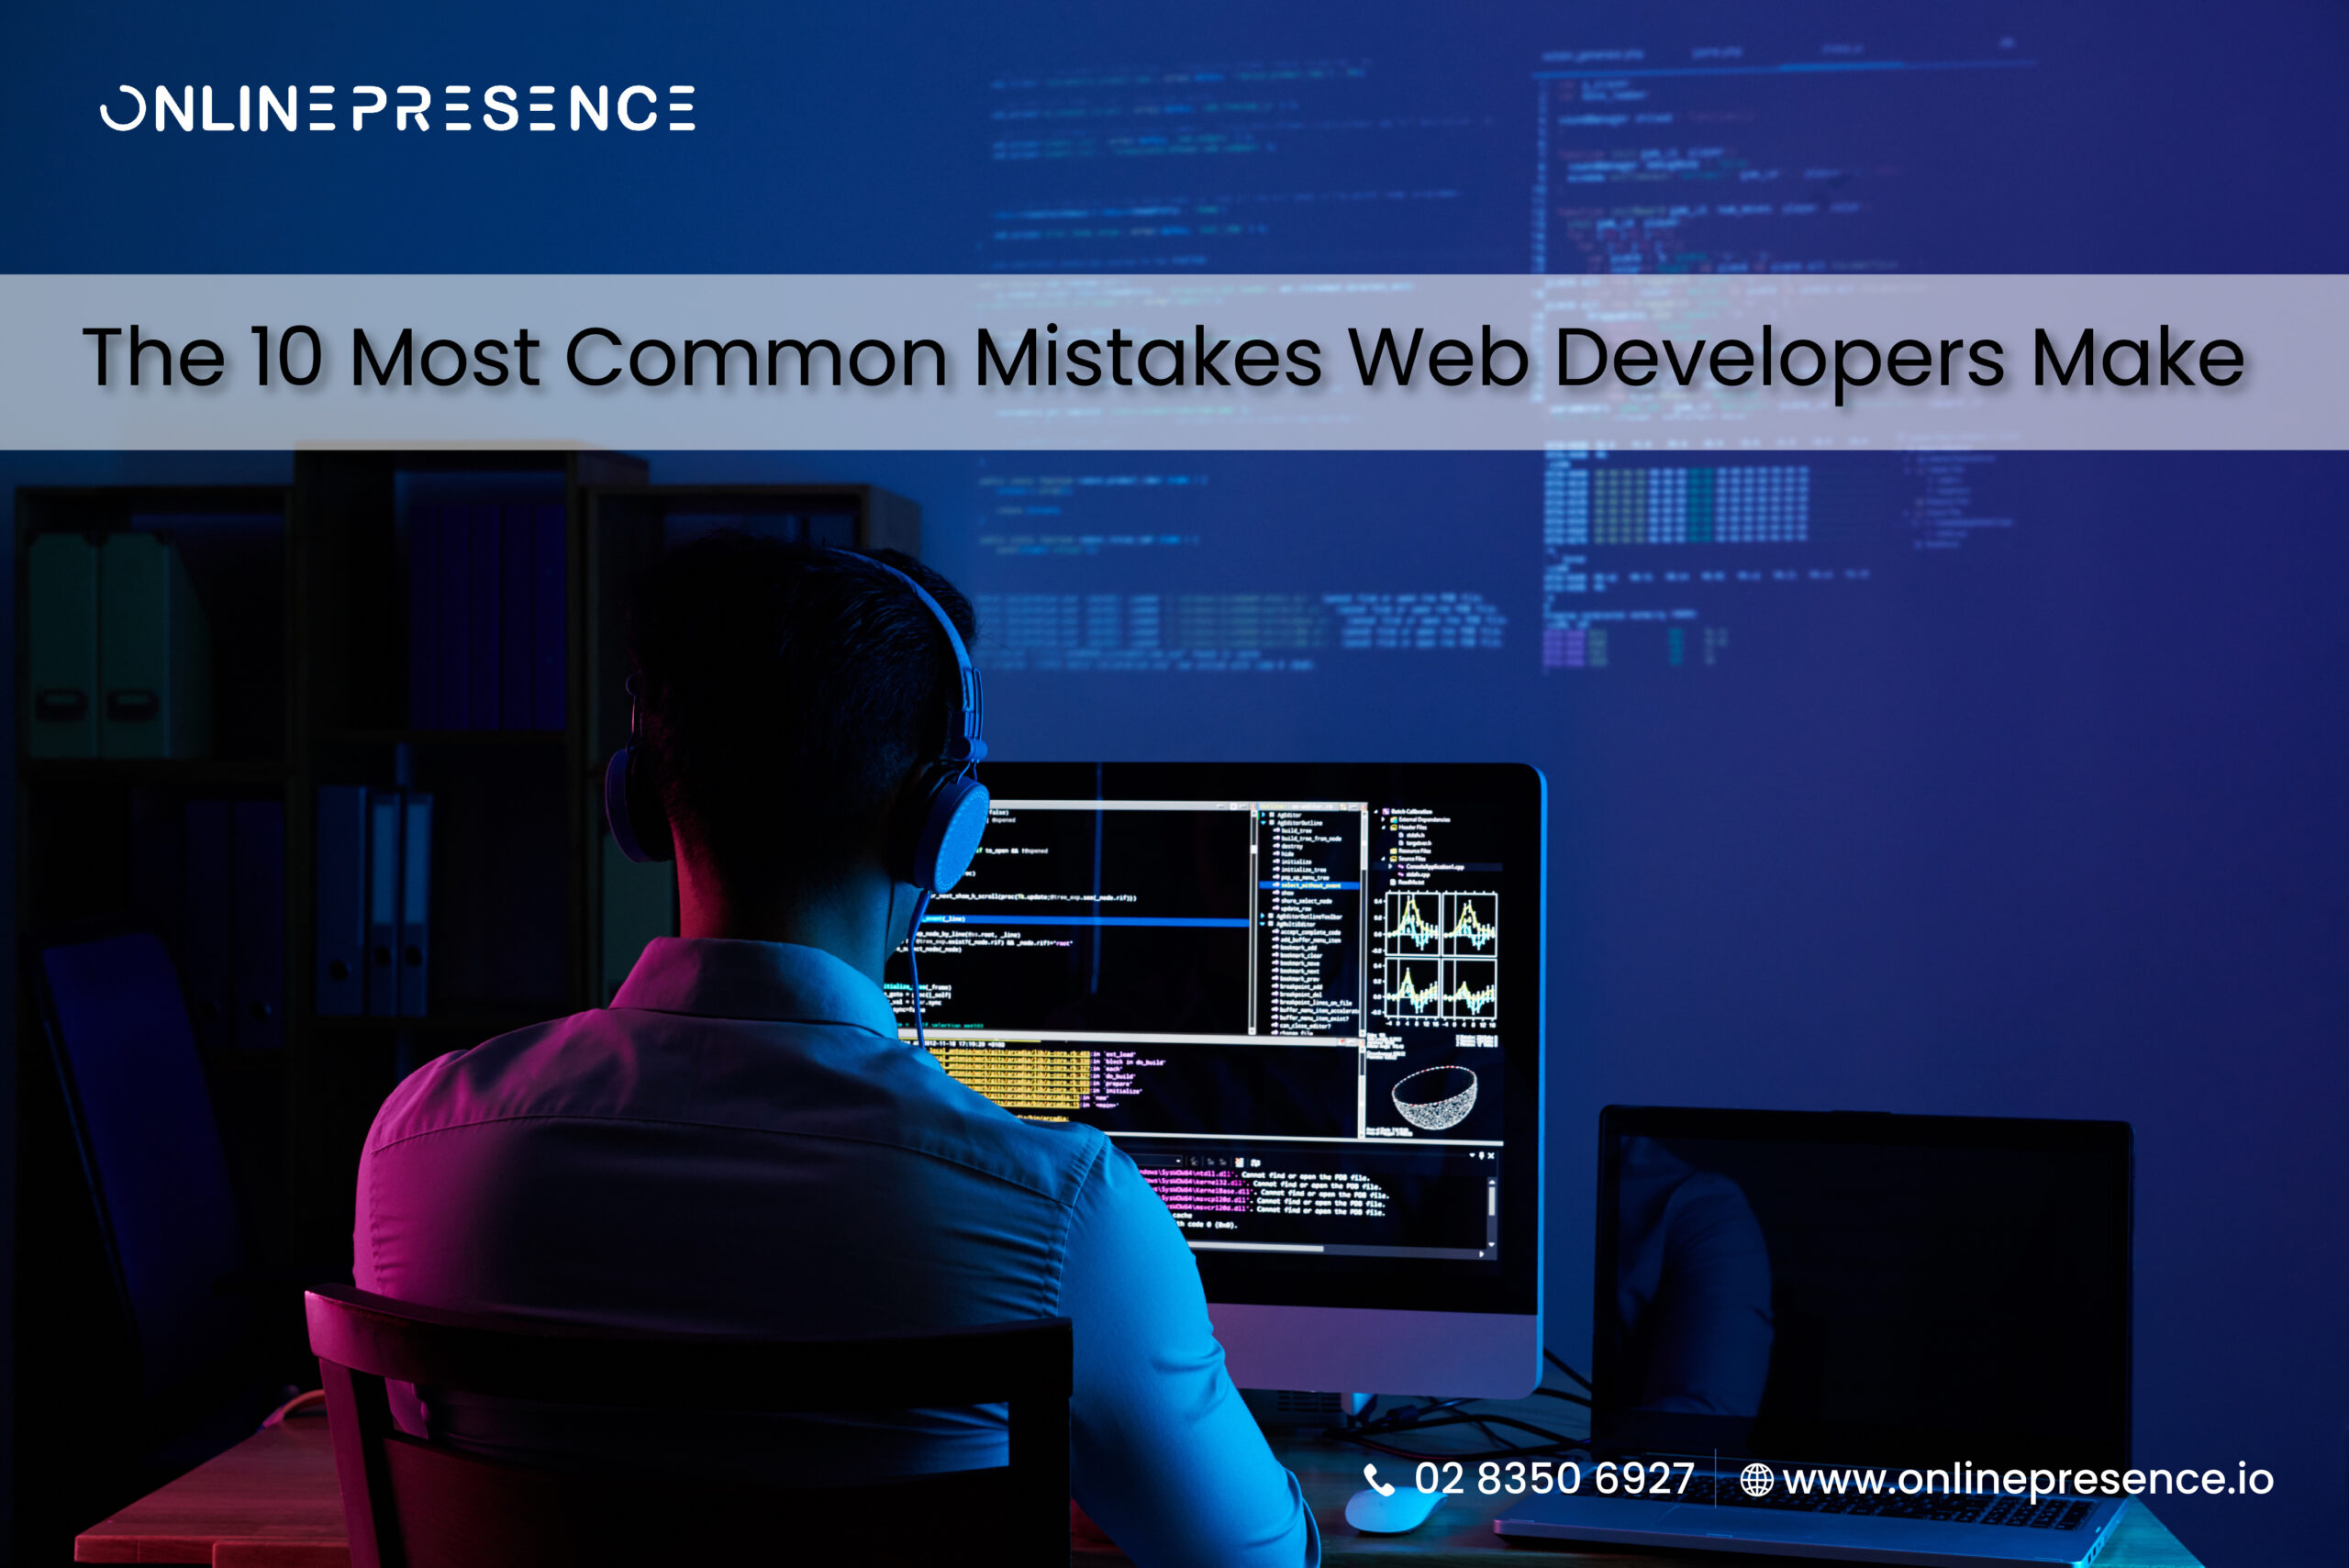 The 10 Most Common Mistakes Web Developers Make